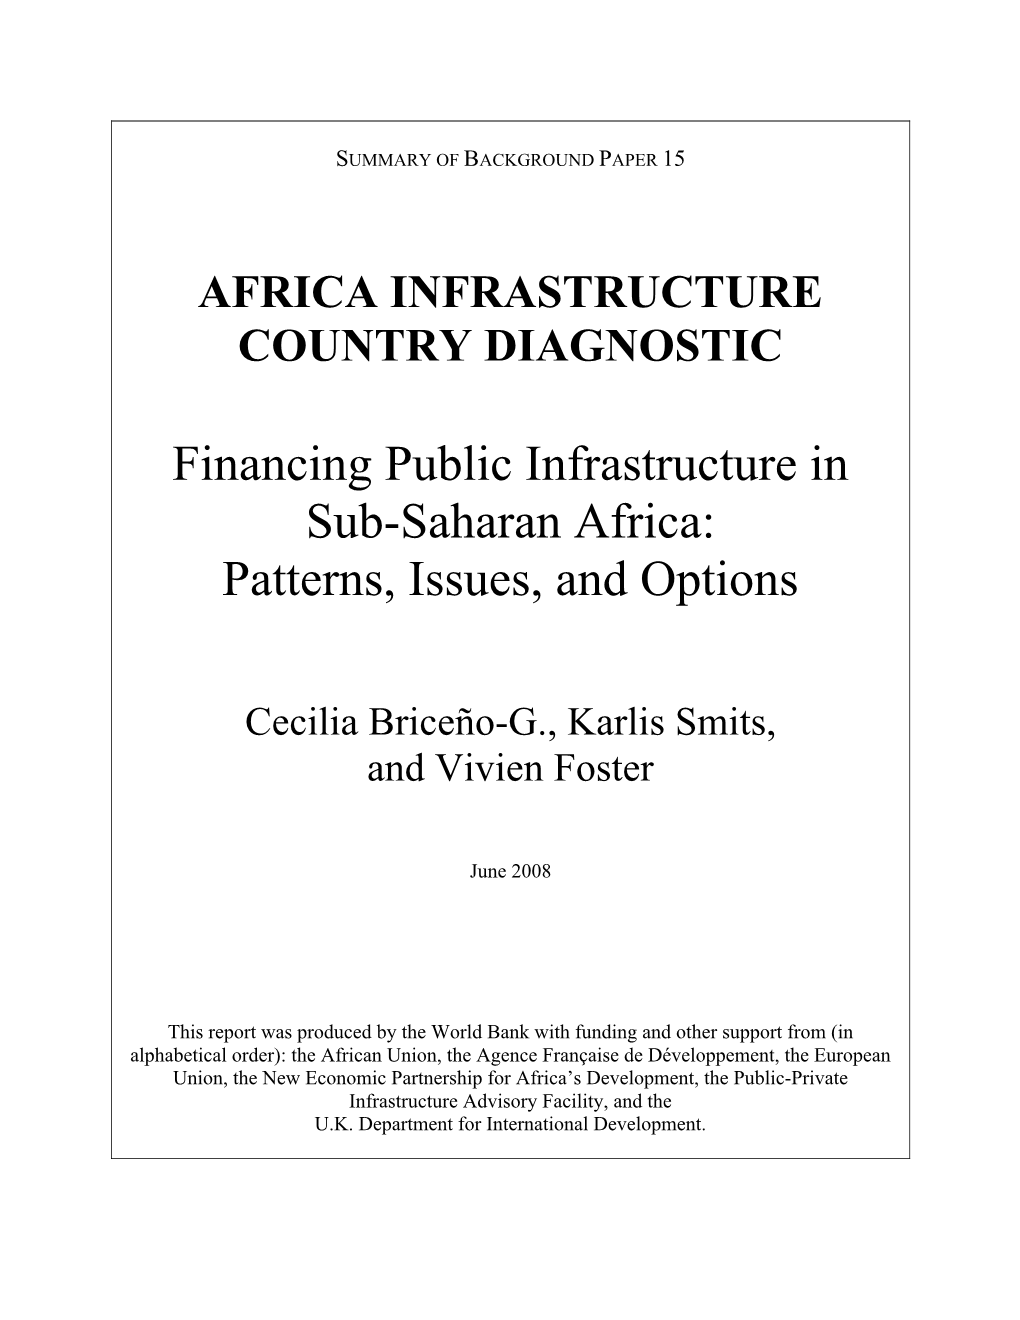 Financing Public Infrastructure in Sub-Saharan Africa: Patterns, Issues, and Options